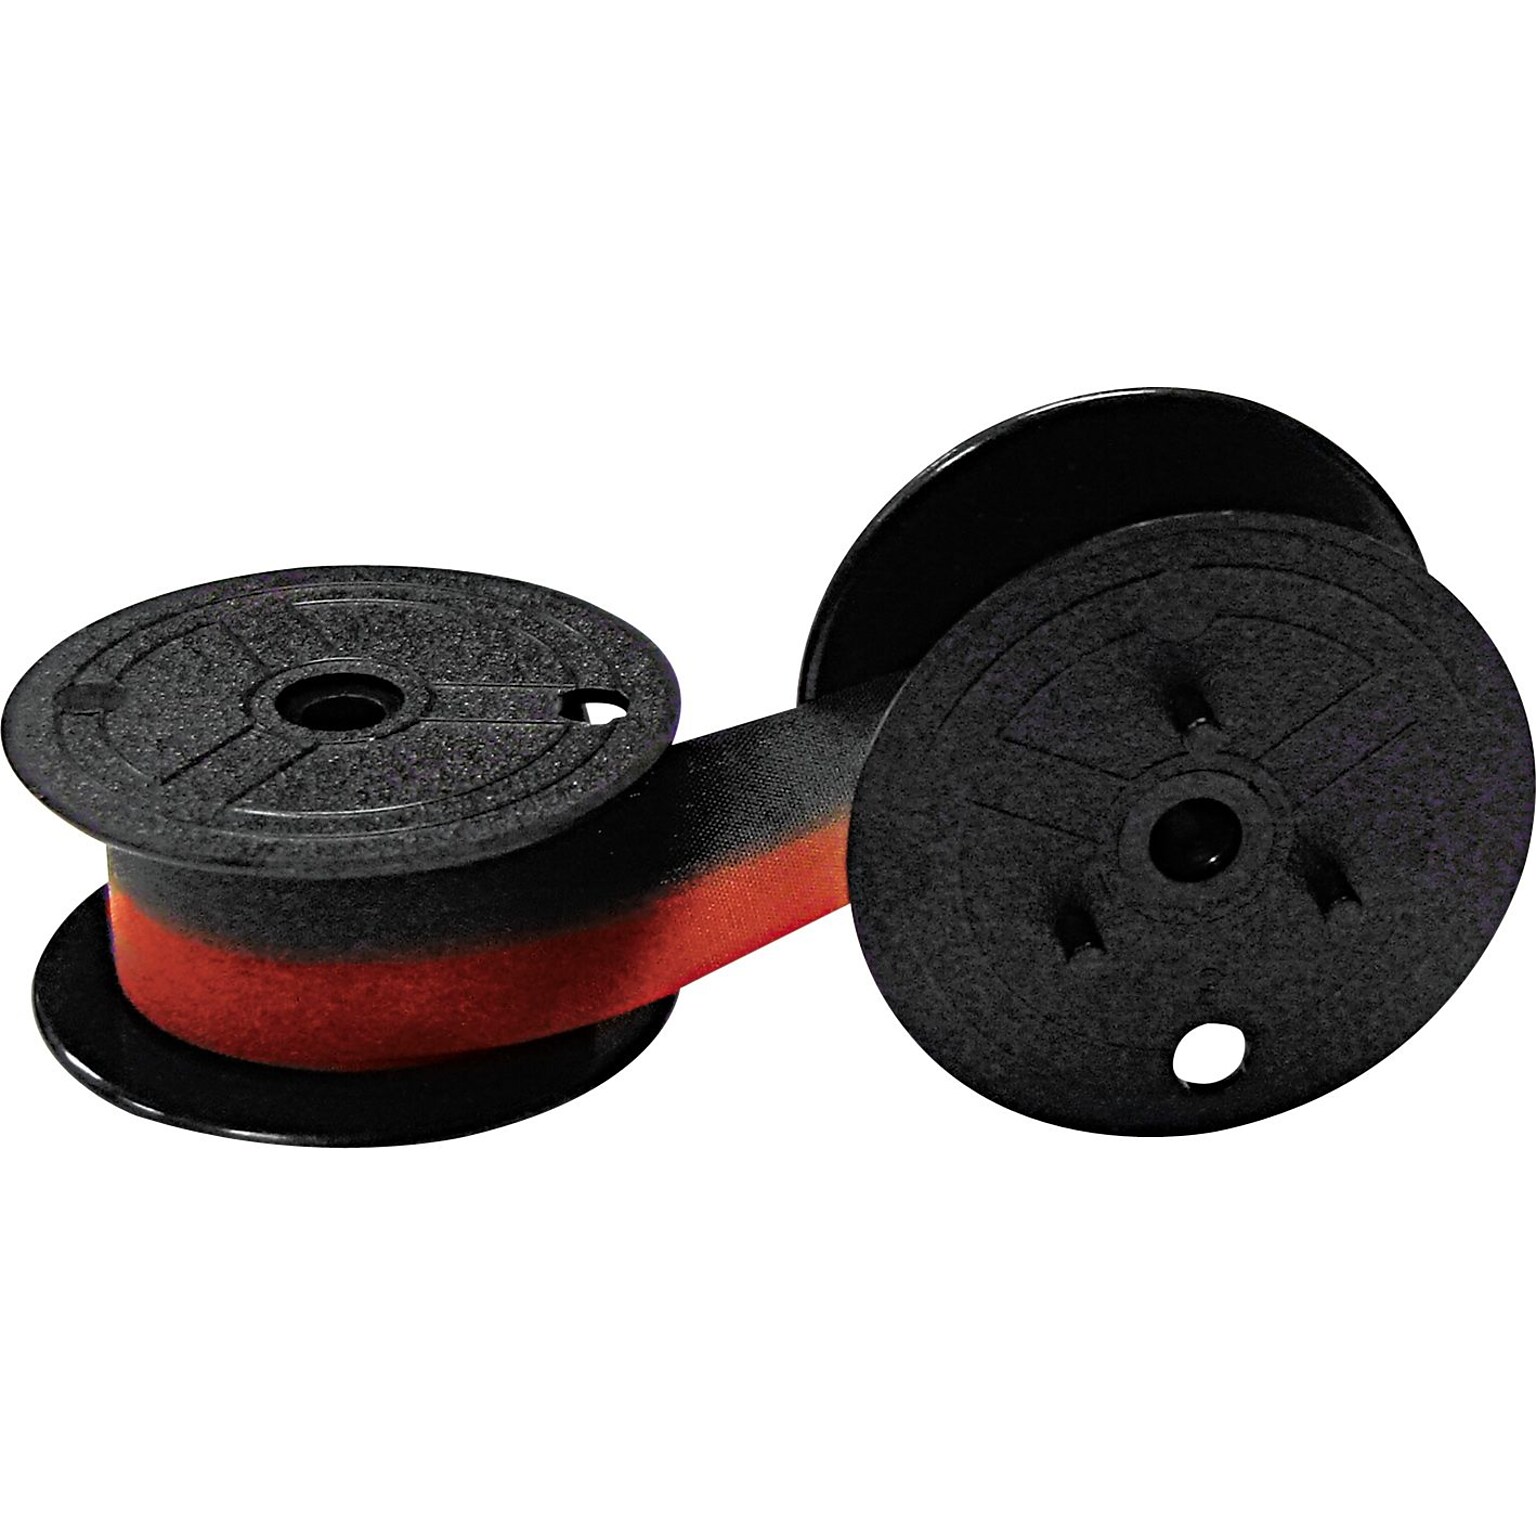 Victor Technology Two Color Ribbon for Printing Calculators, Black and Red (VCT7010)